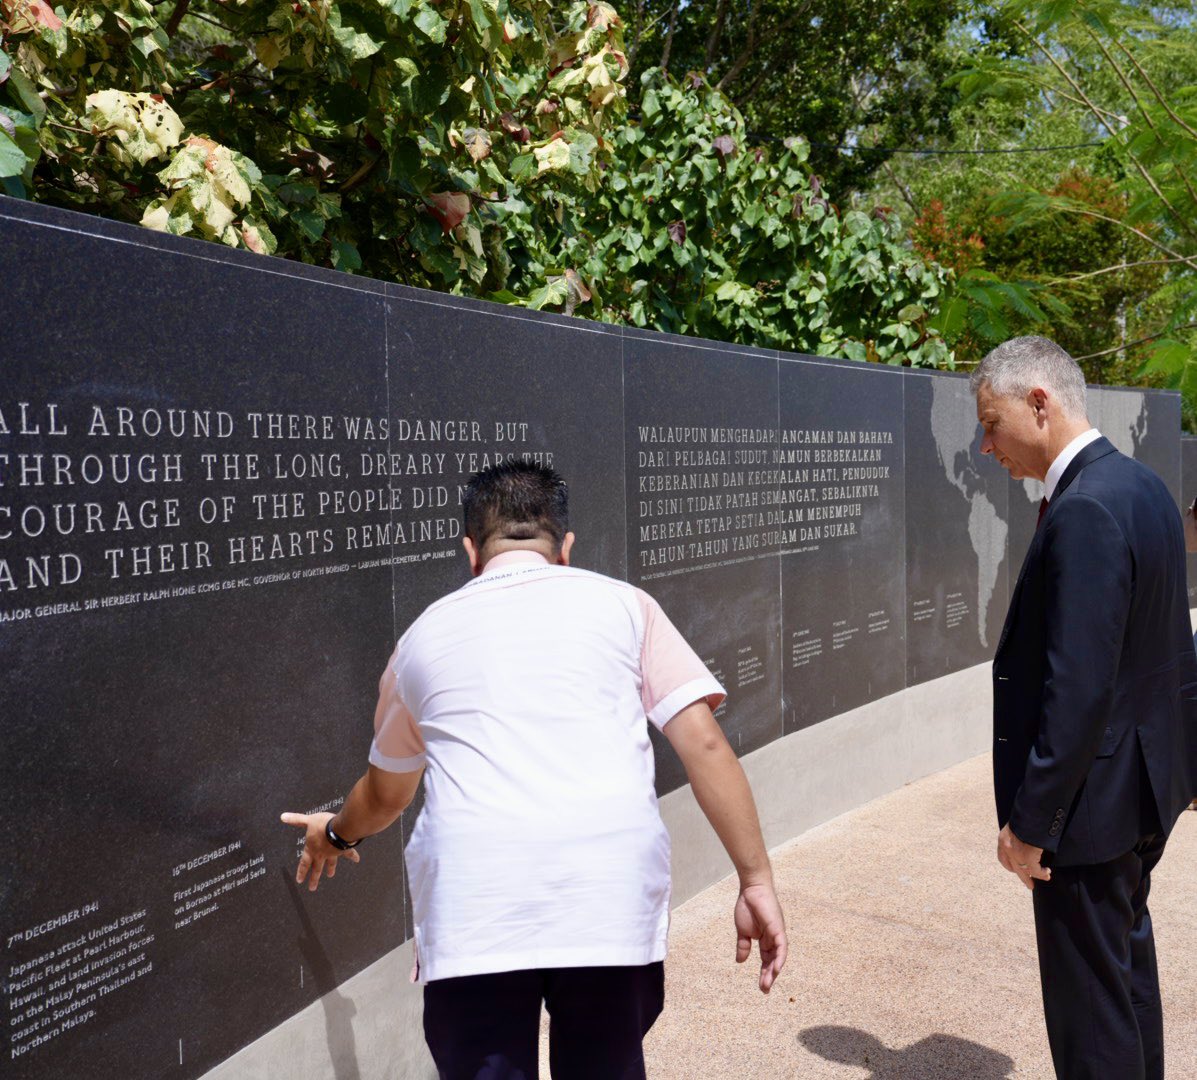 Australian soldiers and the local Malayan population gave their lives here at Surrender Point in defence of freedom and liberty, values we hold dear today. An honour to visit the commemoration site to pay my respects.